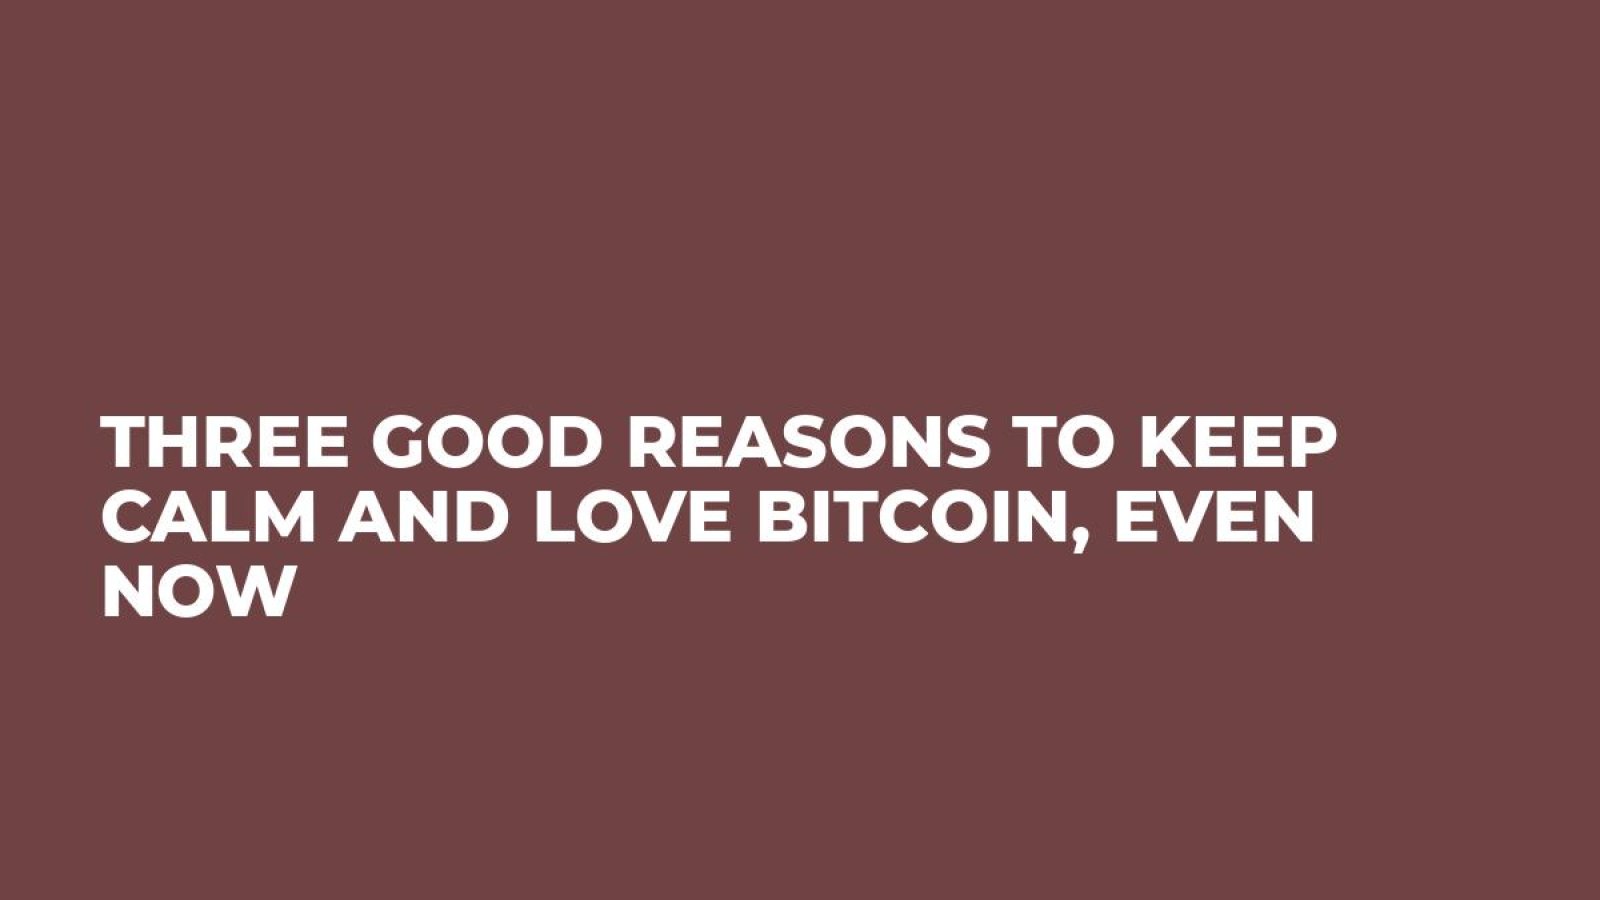 Three Good Reasons To Keep Calm and Love Bitcoin, Even Now